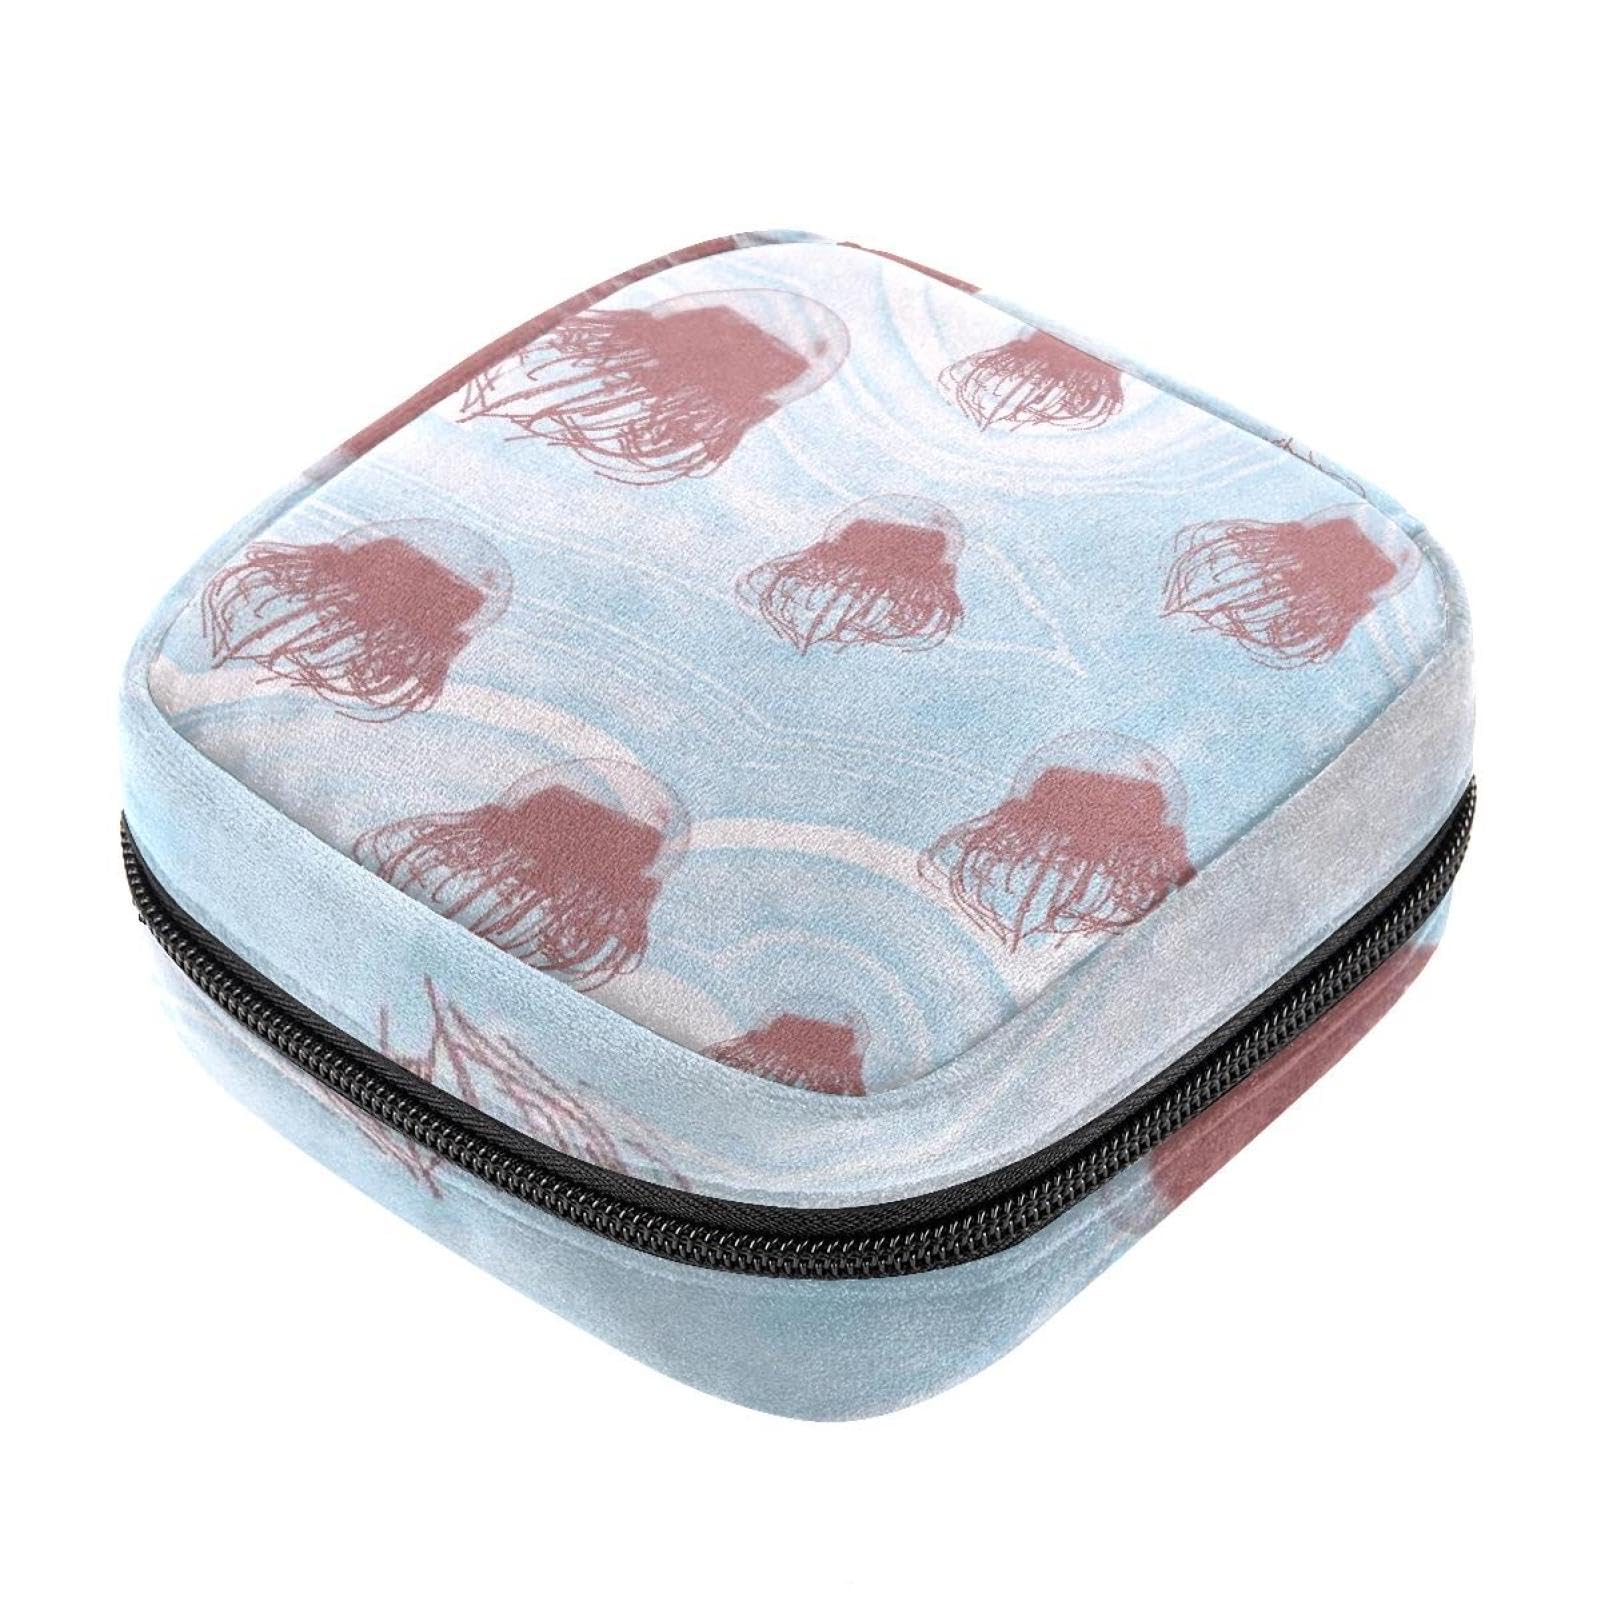 Jellyfish Period Pouch Portable Tampon Storage Bag for Sanitary Napkins Tampon  Holder for Purse Feminine Product Organizer First Period Gifts for Teen  Girls School